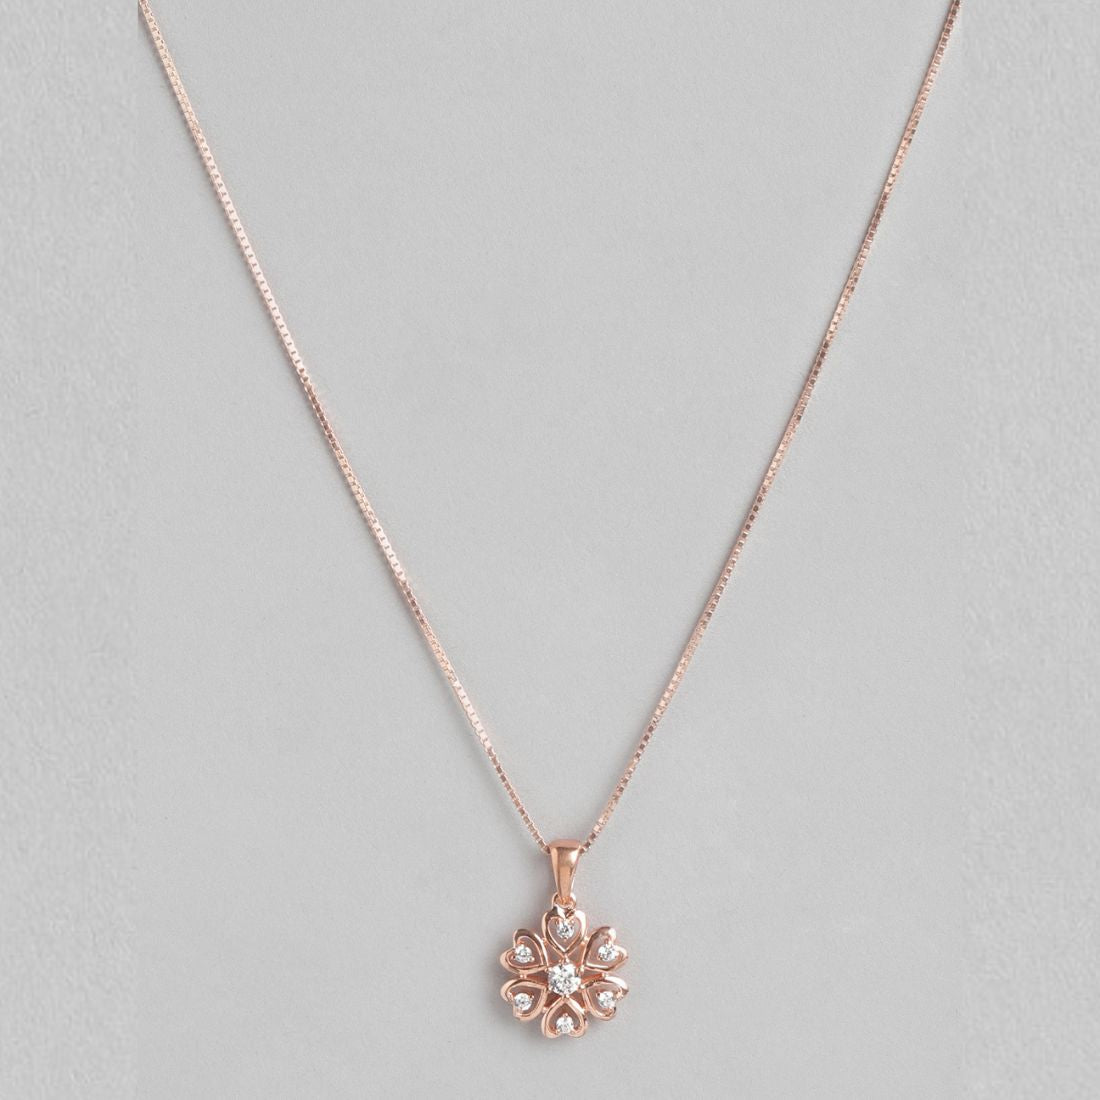 Floral Radiance Rose Gold-Plated CZ 925 Sterling Silver Pendant